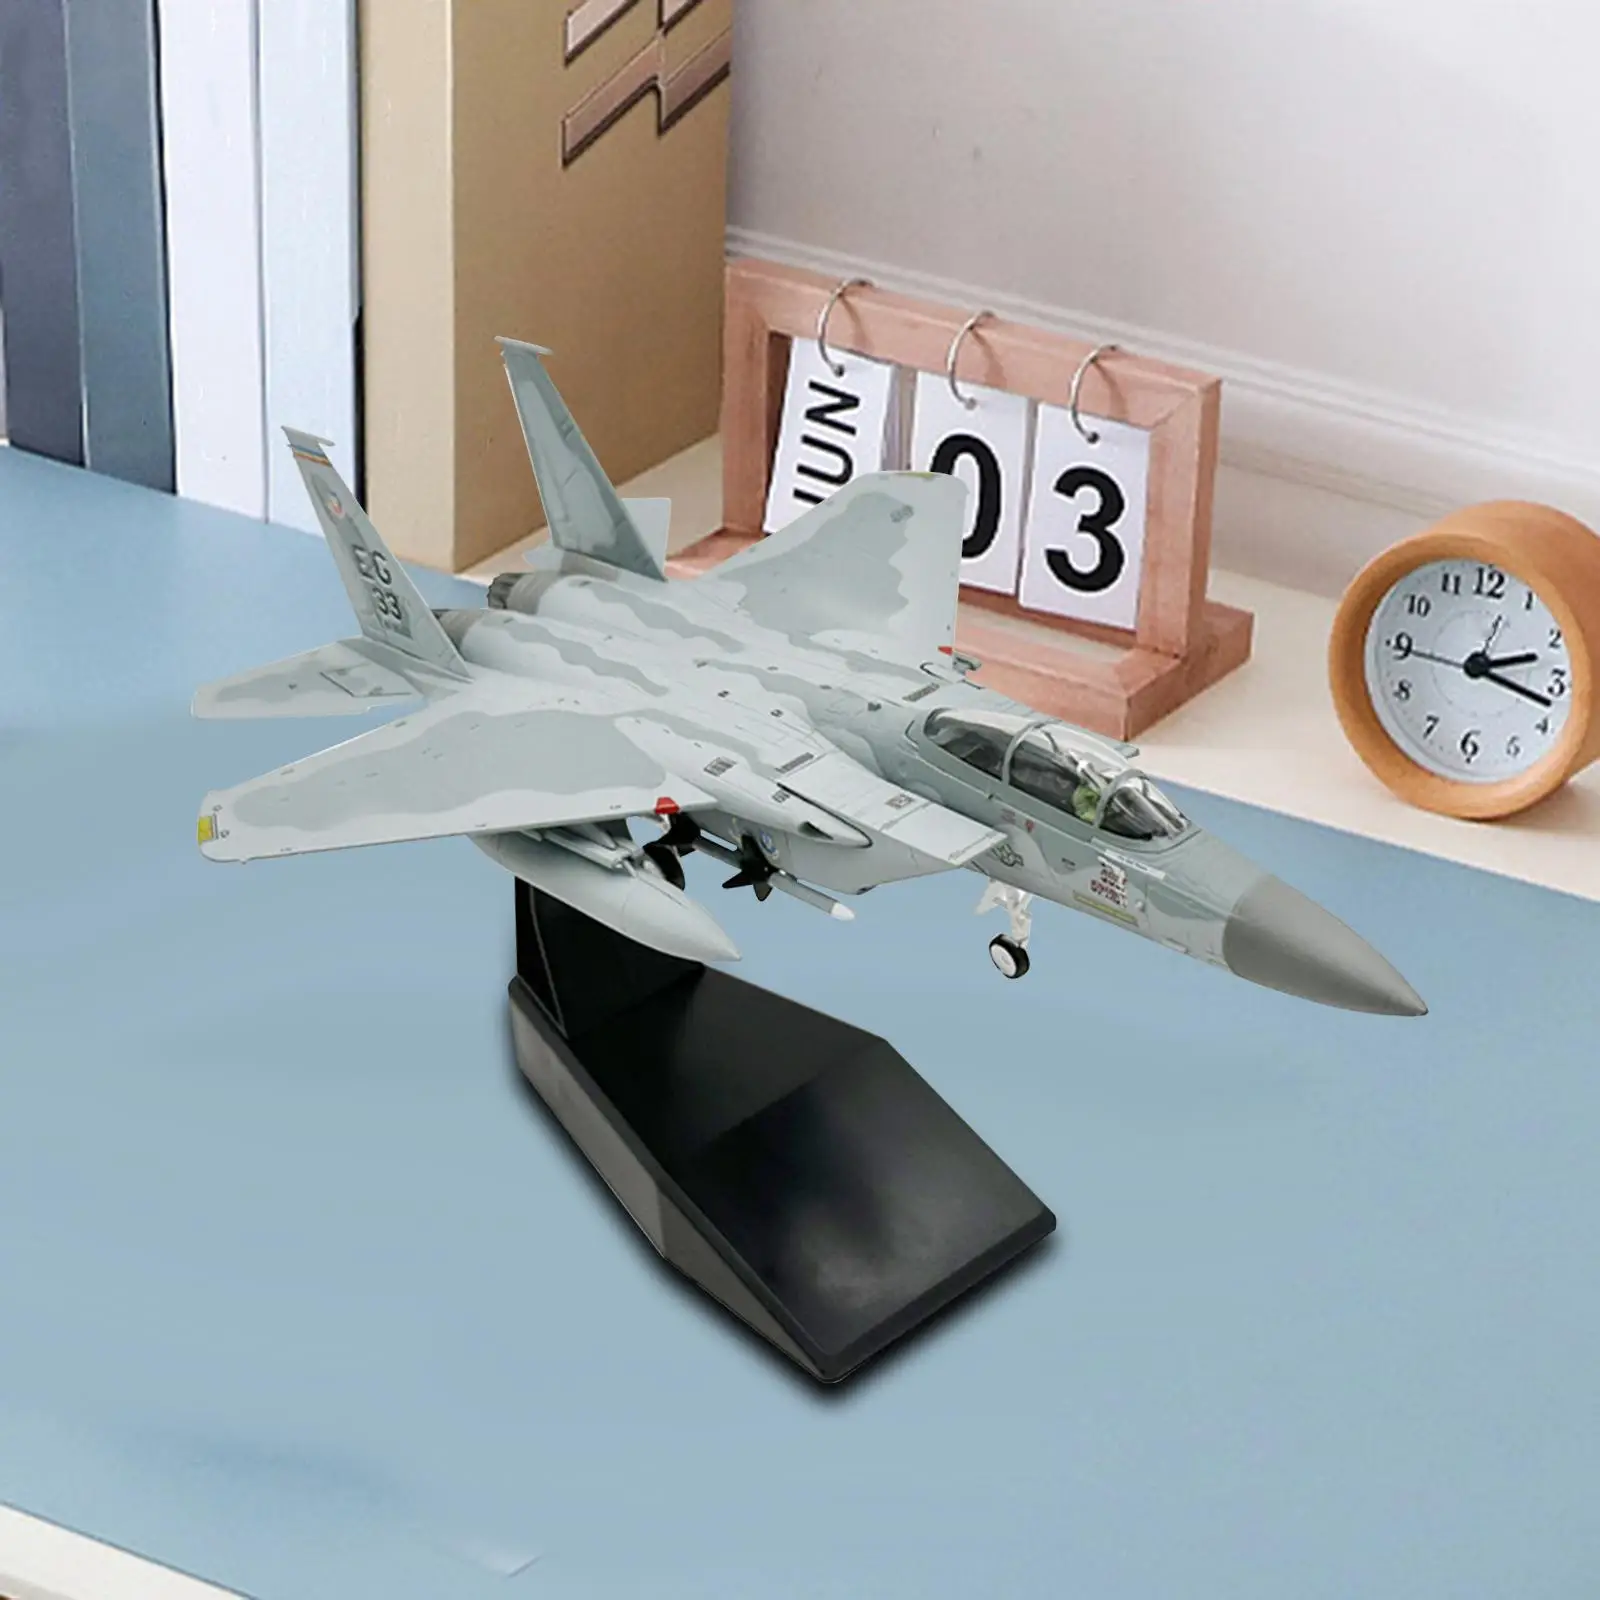 1/100 Scale F Fighter Collectibles Display for Home Decor Fighter Toy Ornament Home Decoration Collectables